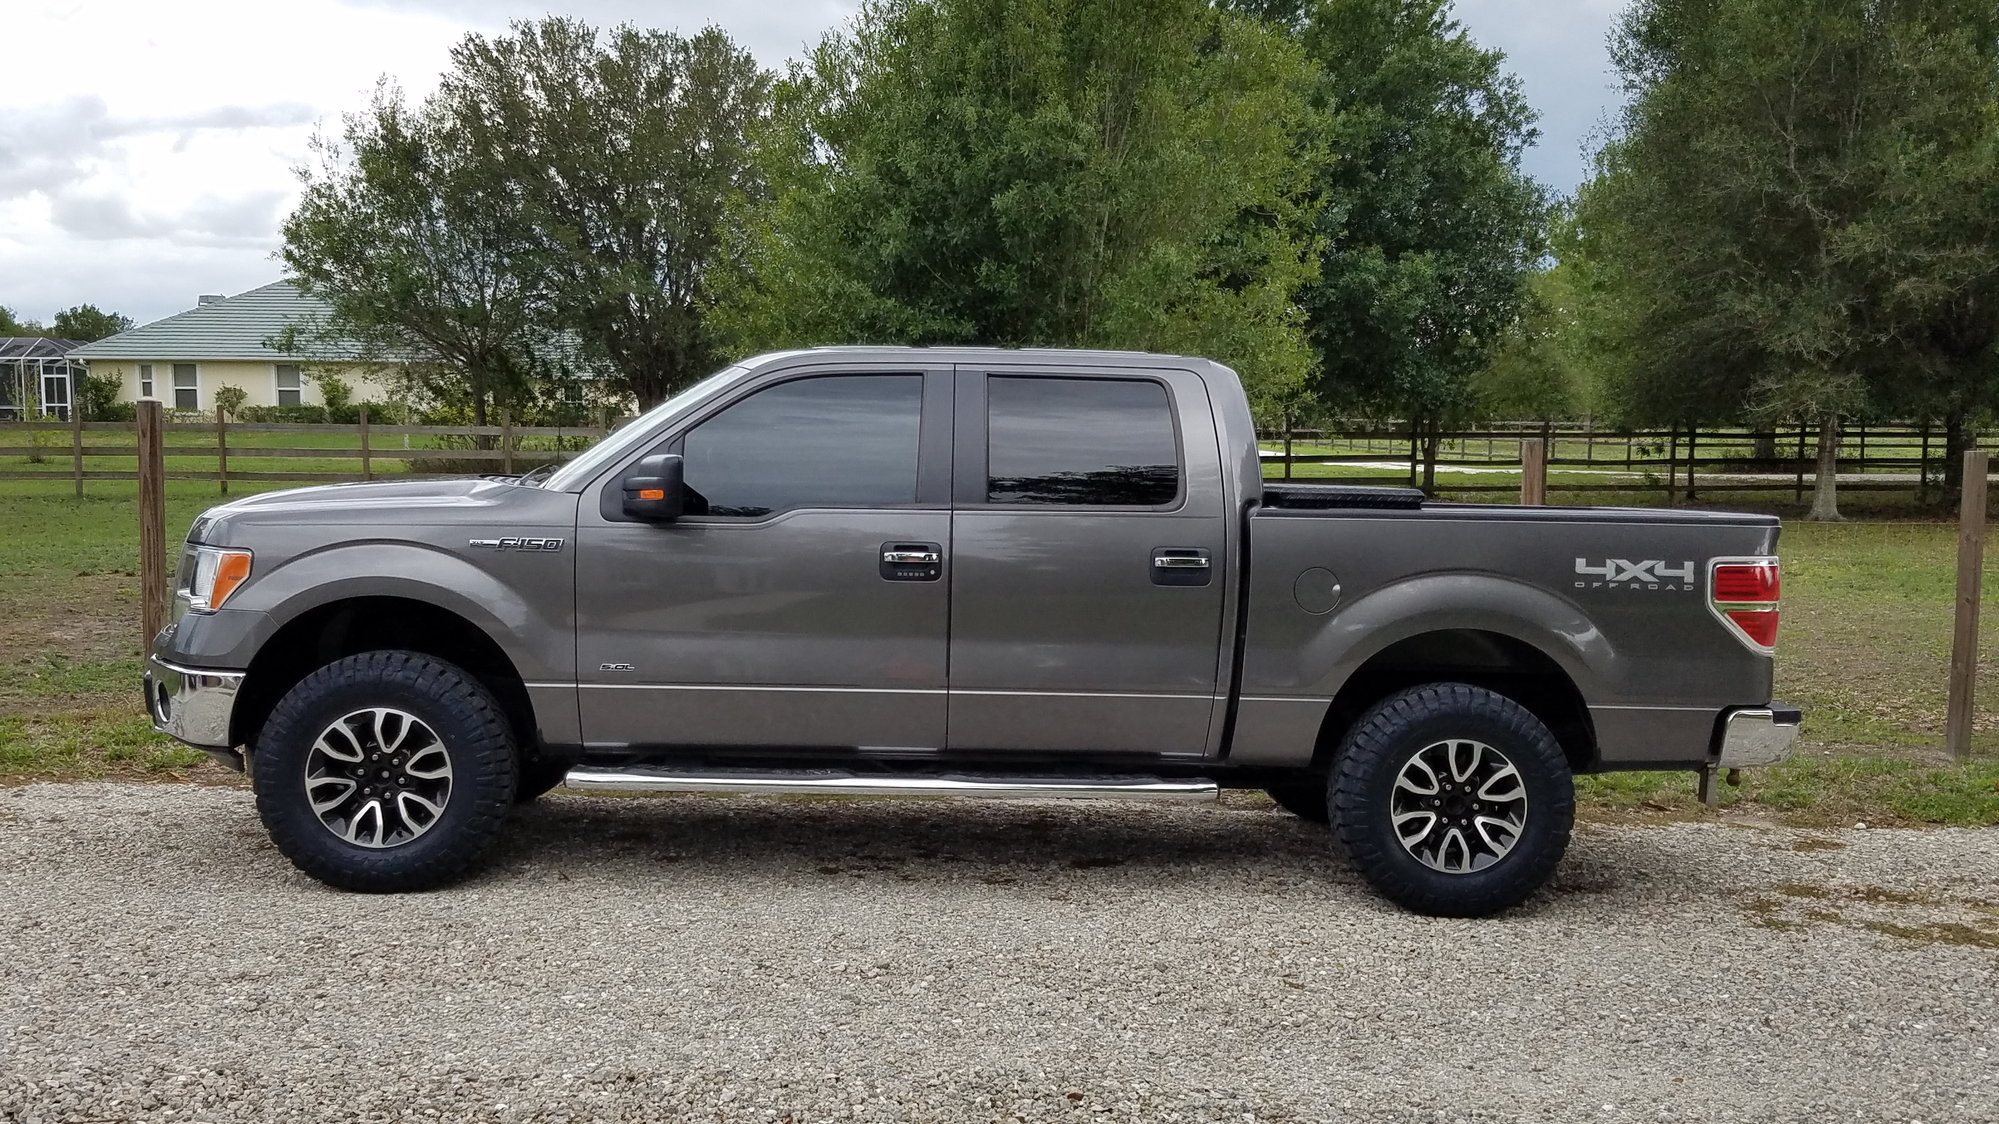 285/75r17 of 285/70r17? - F150online Forums 2007 Ford F 150 Tire Size P235 70r17